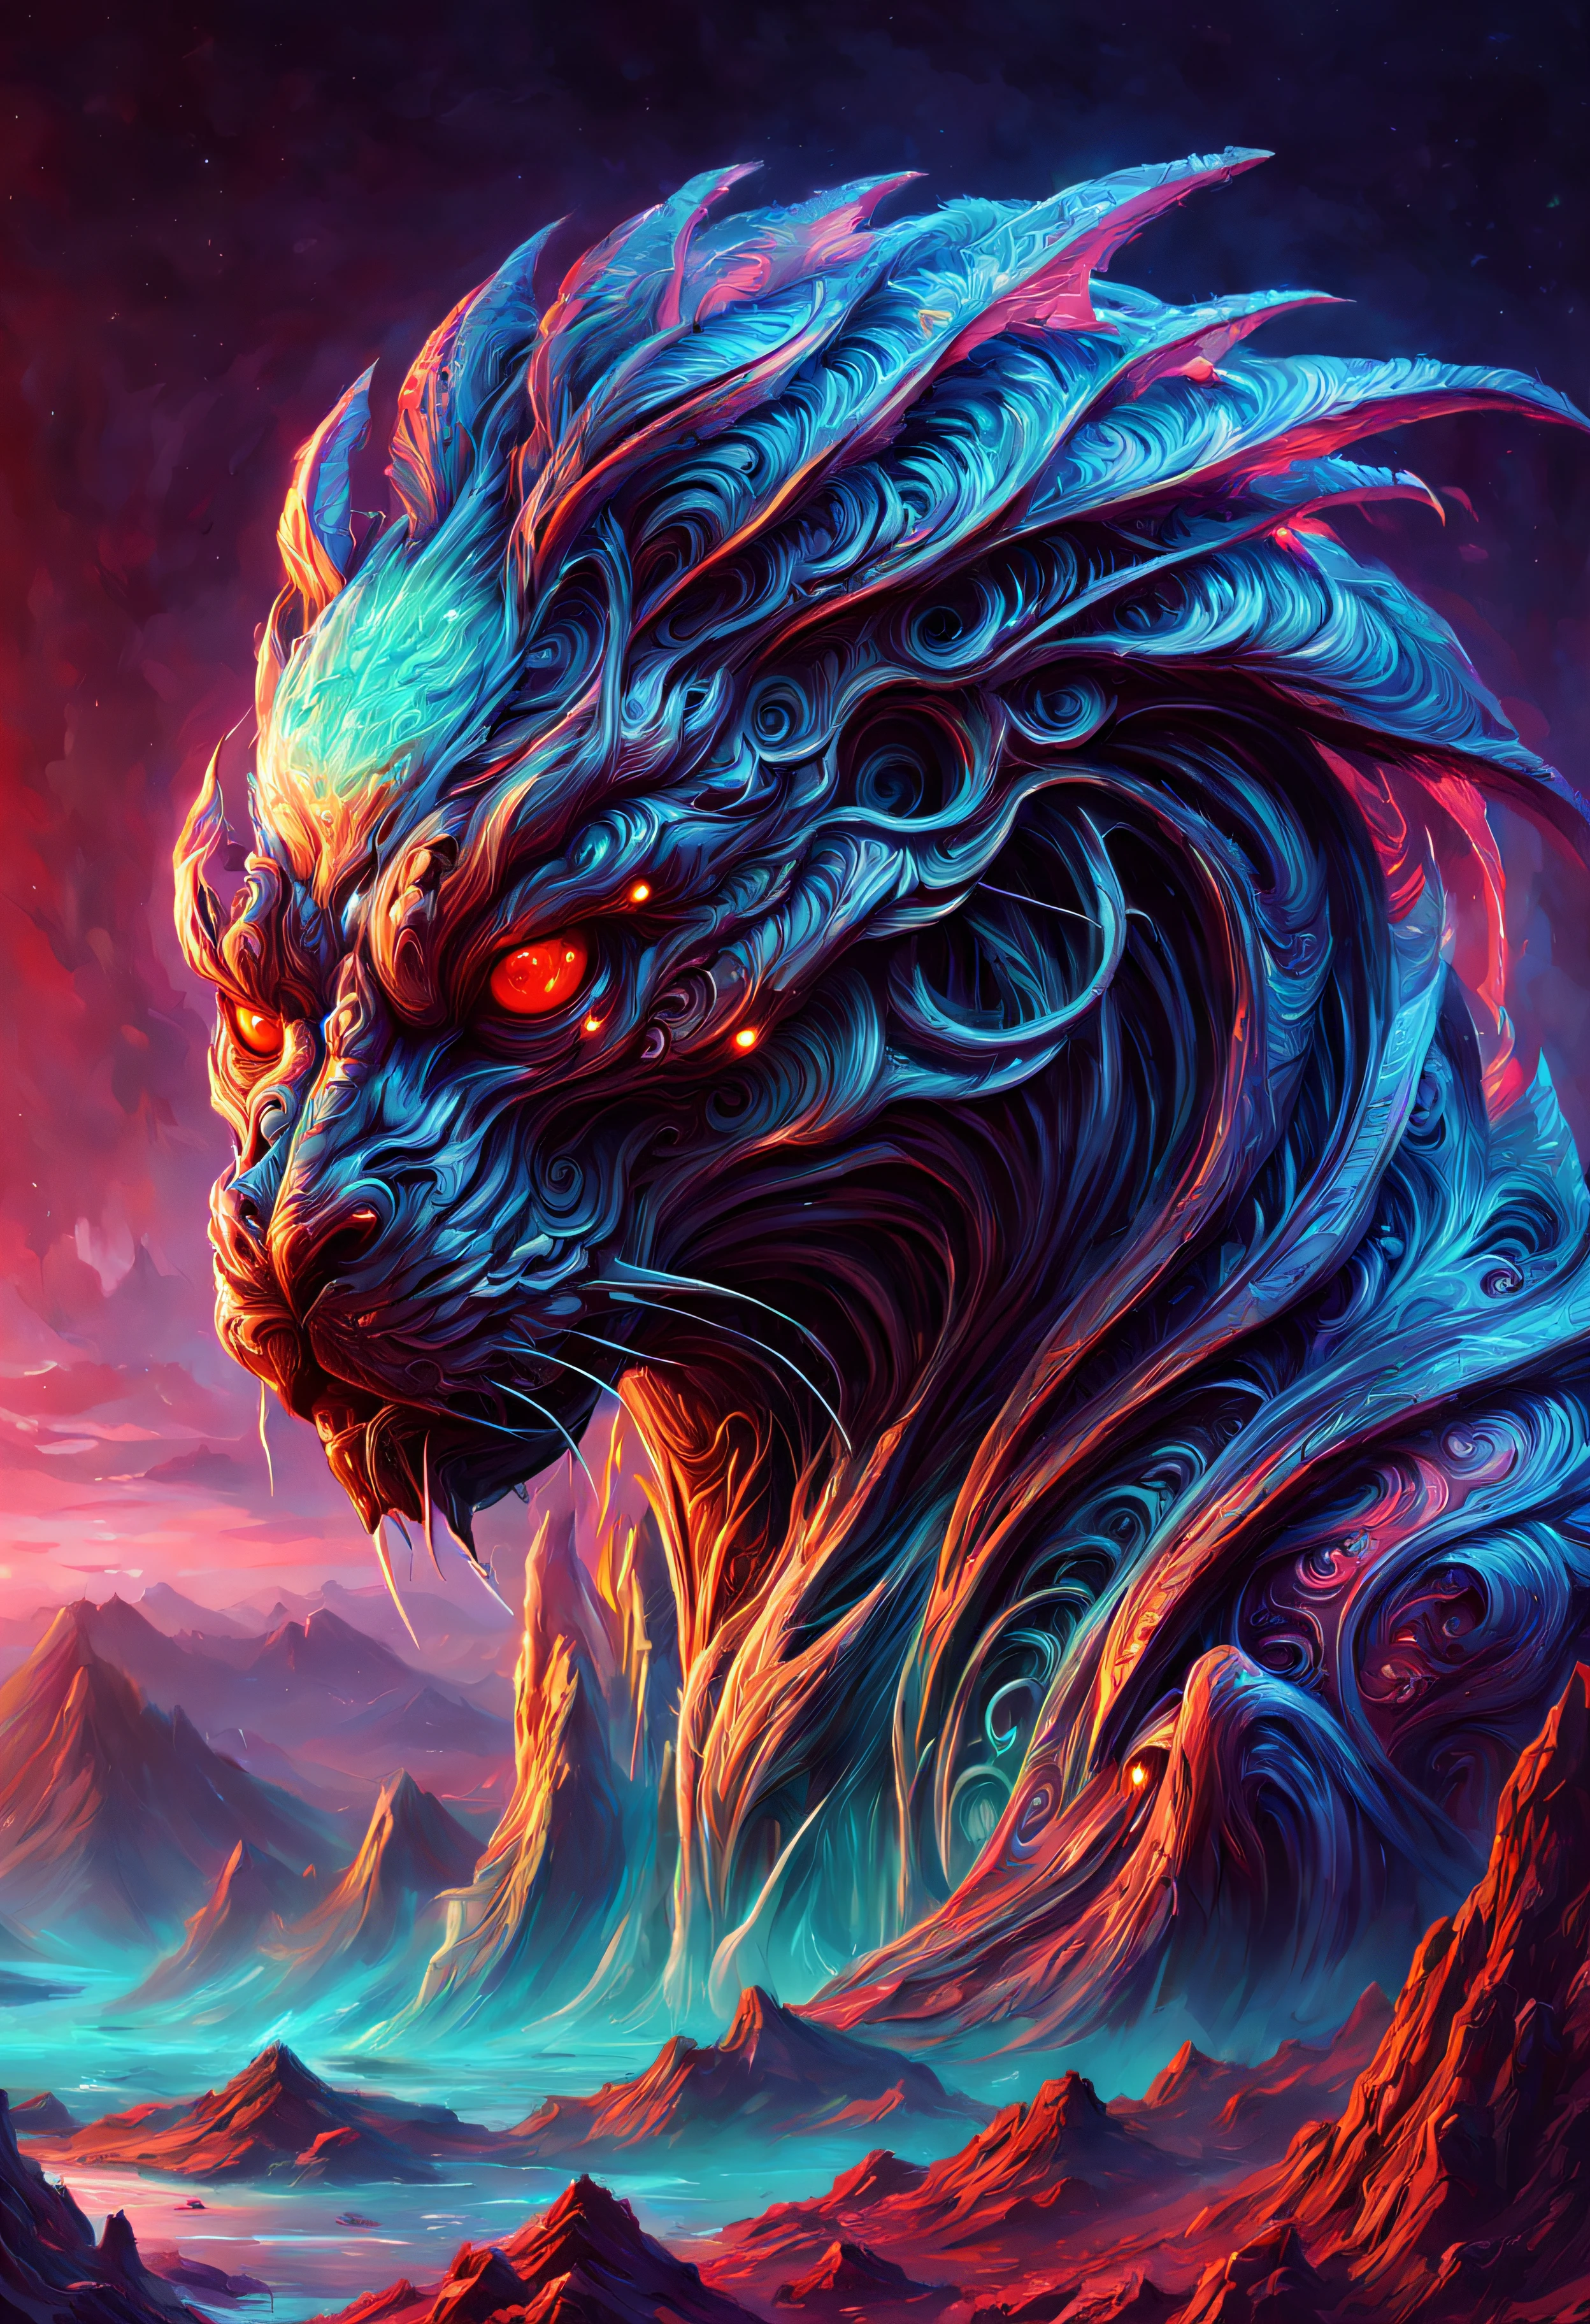 art by Marek Okon and dan mumford,  Yarn model of a large Brother, the Brother is Luminous, Samurai, elegant, Cryptidcore, anaglyph filter, alienz too